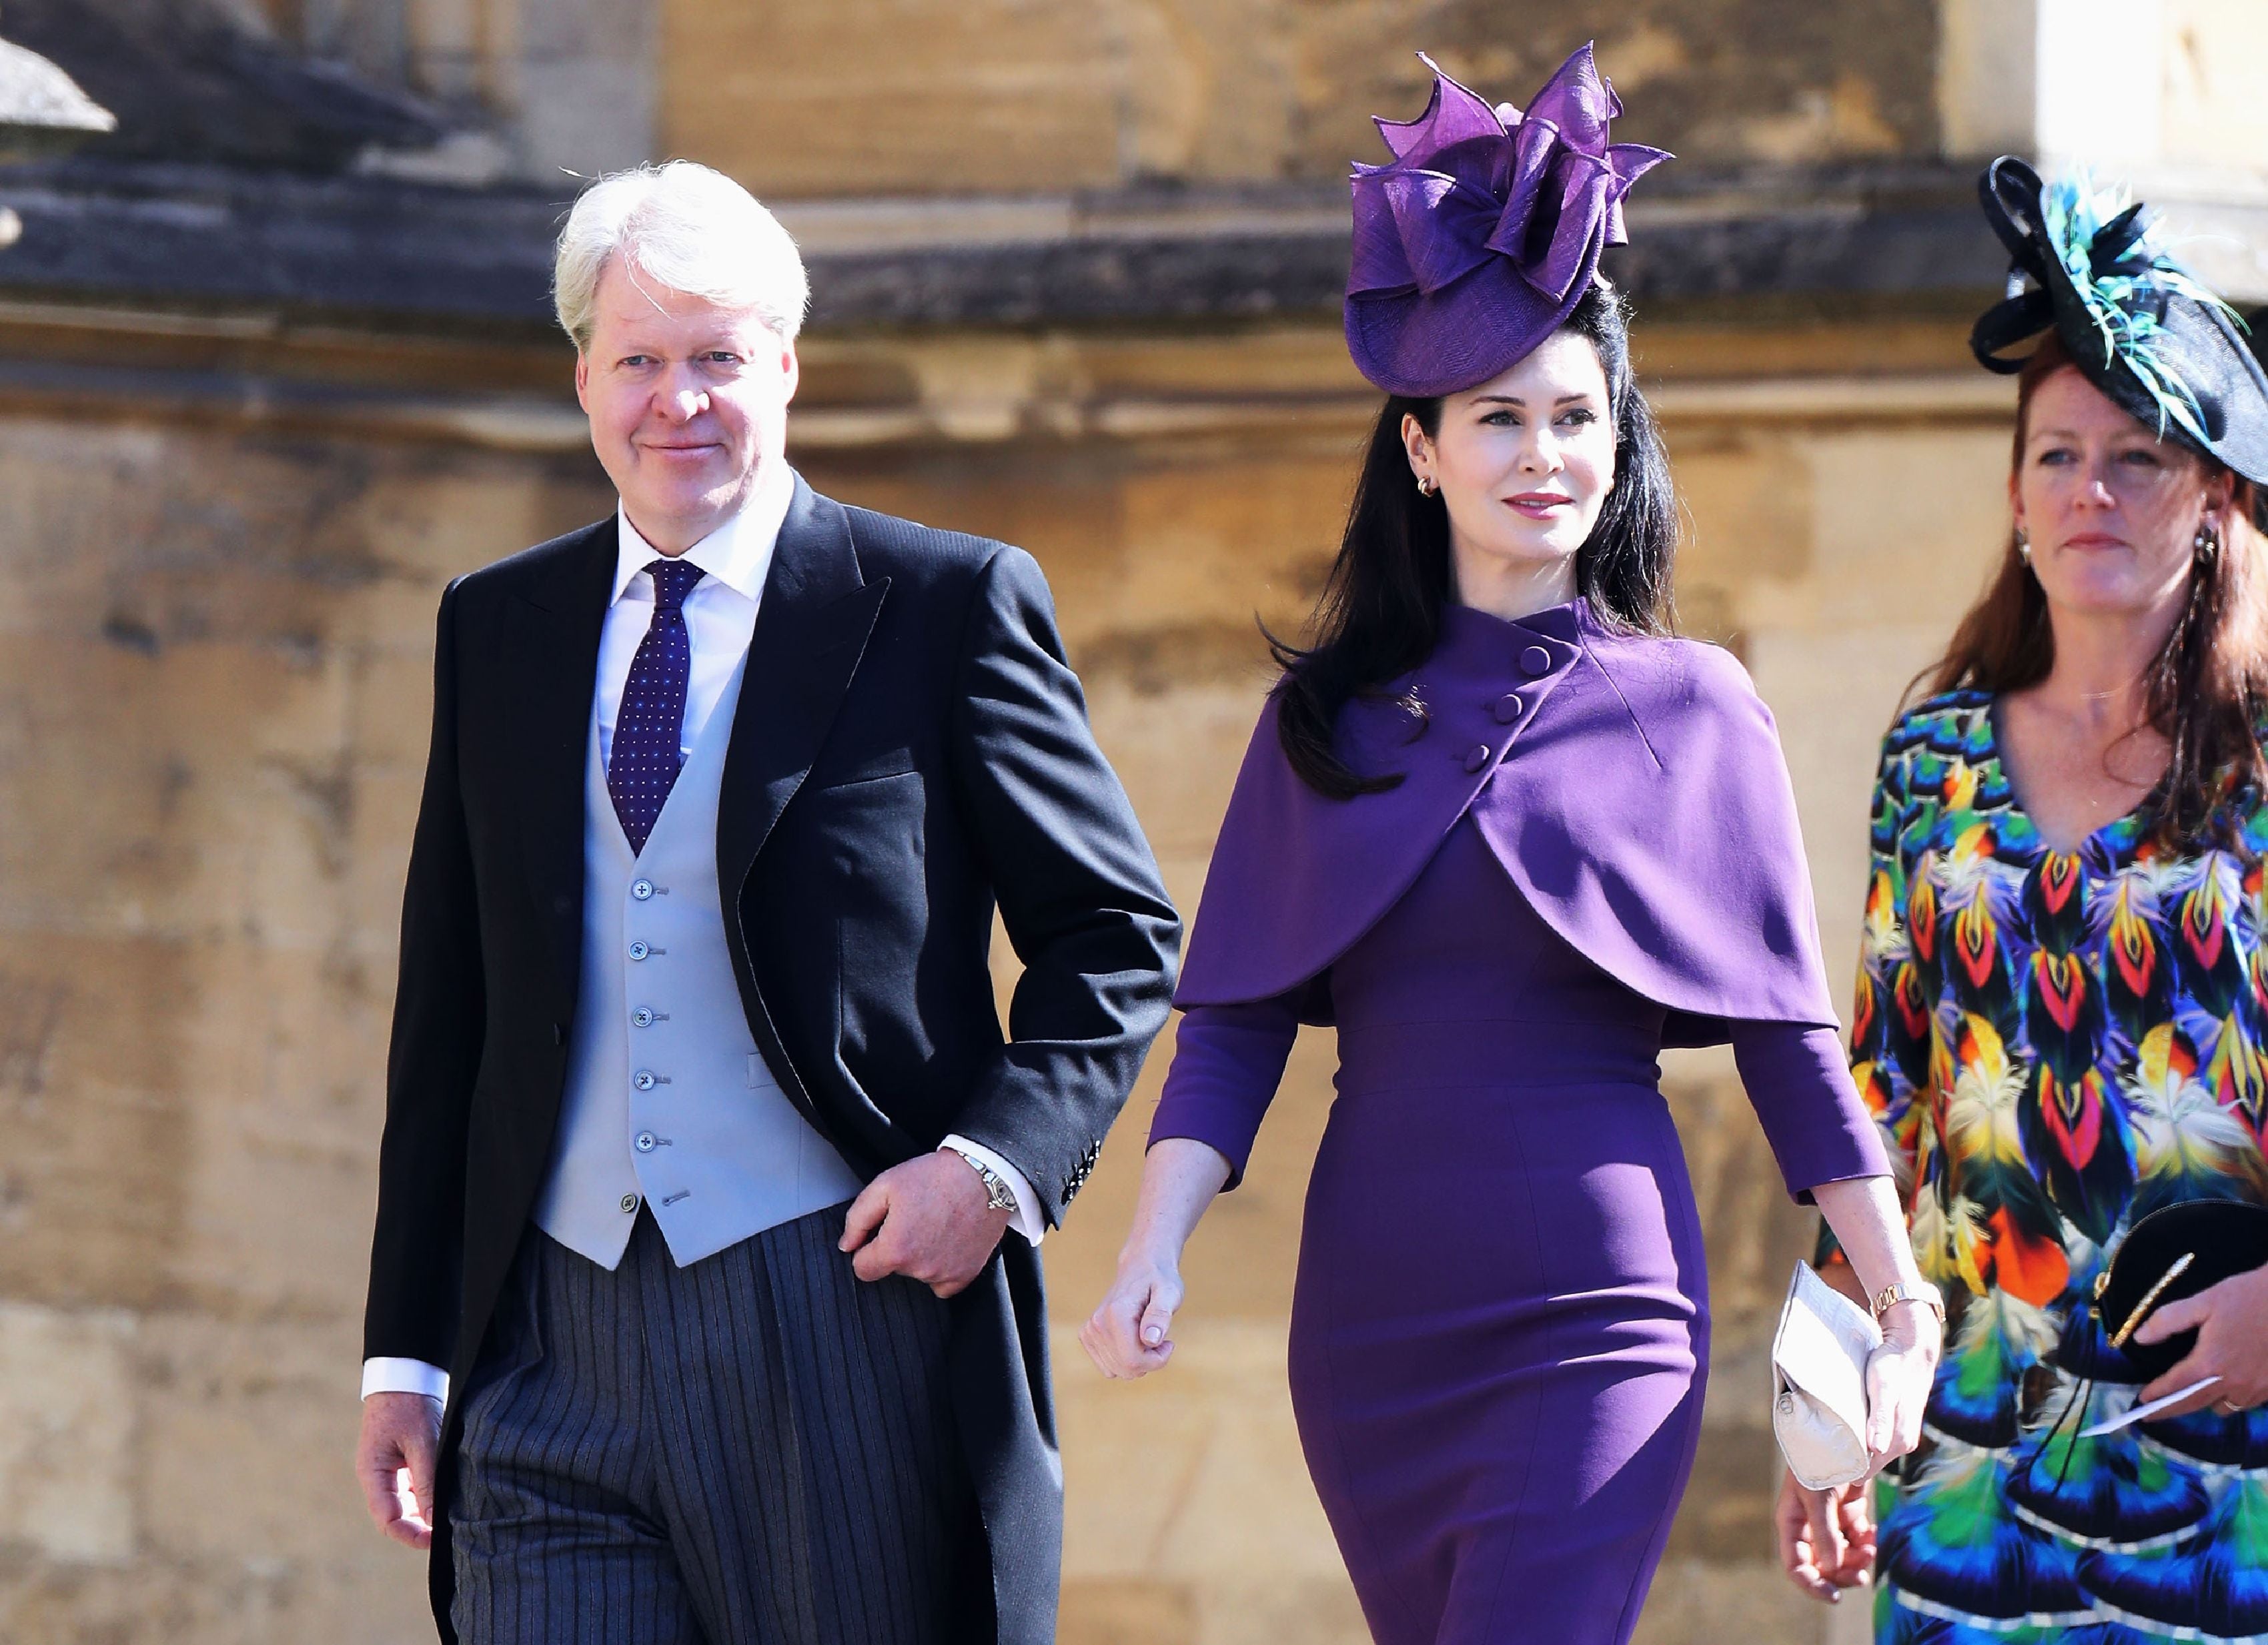 Earl Charles Spencer and his wife Karen Spencer attend the royal wedding of Prince Harry and Meghan Markle at St. George's Chapel in Windsor, United Kingdom, on May 19, 2018.